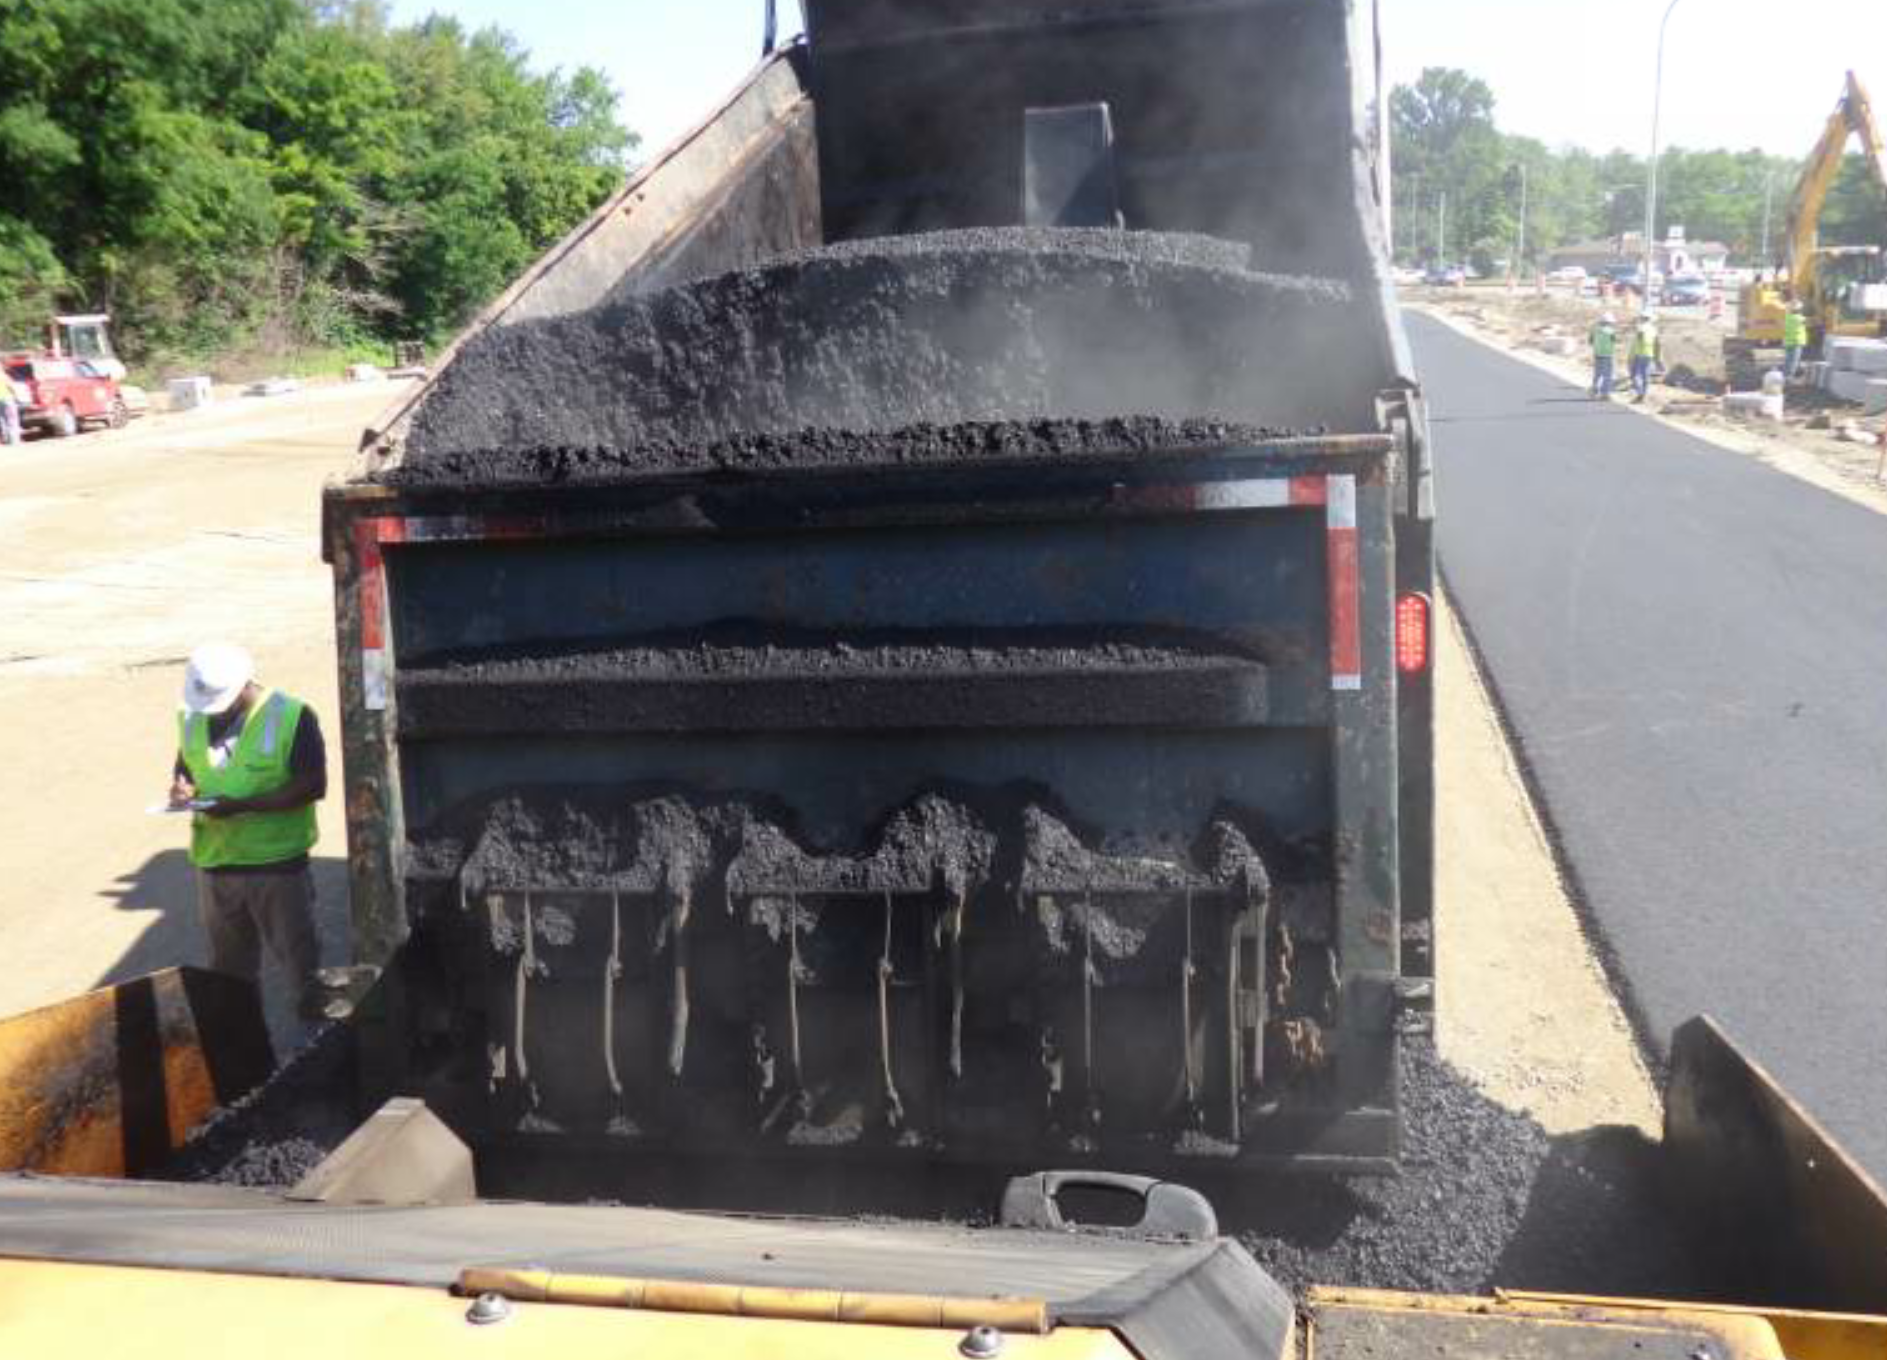 This driver, who will remain anonymous, did not align the body correctly under the silo for loadout. Luckily, he was positioned so that mix fell on the back end of the truck—and onto the scale where plant personnel had to bring in a skid steer for cleanup—and not on the cab. The cooled mix presents a hazard to drivers behind the truck and threatens material segregation when it falls into the hopper. While the driver has reflective tape along the top and sides of the back end for additional safety, that feature is partially hidden by his poor loadout skill and negligence. If you experience a slip-up at loadout, stop. You must stop and clean up any mess before you endanger motorists and yourself on the roadway.